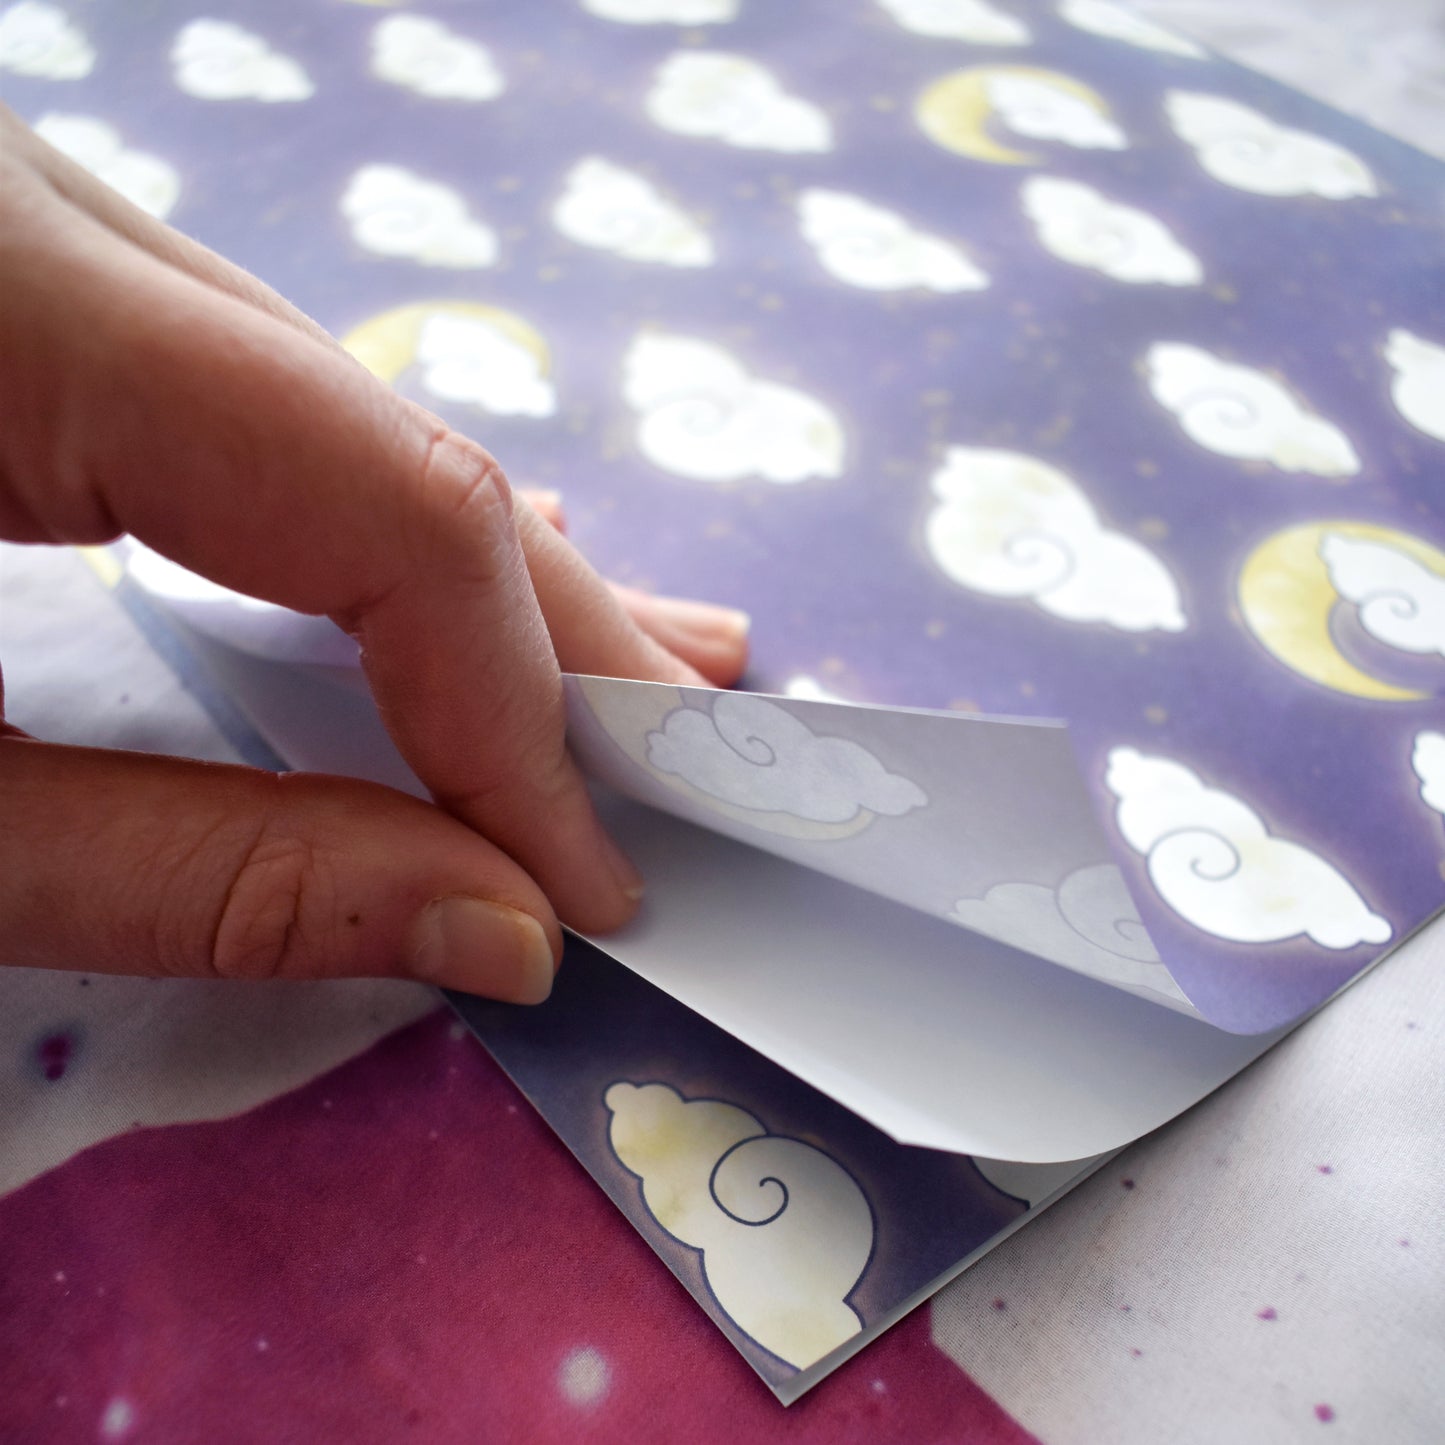 Moon and Clouds Wrapping Paper